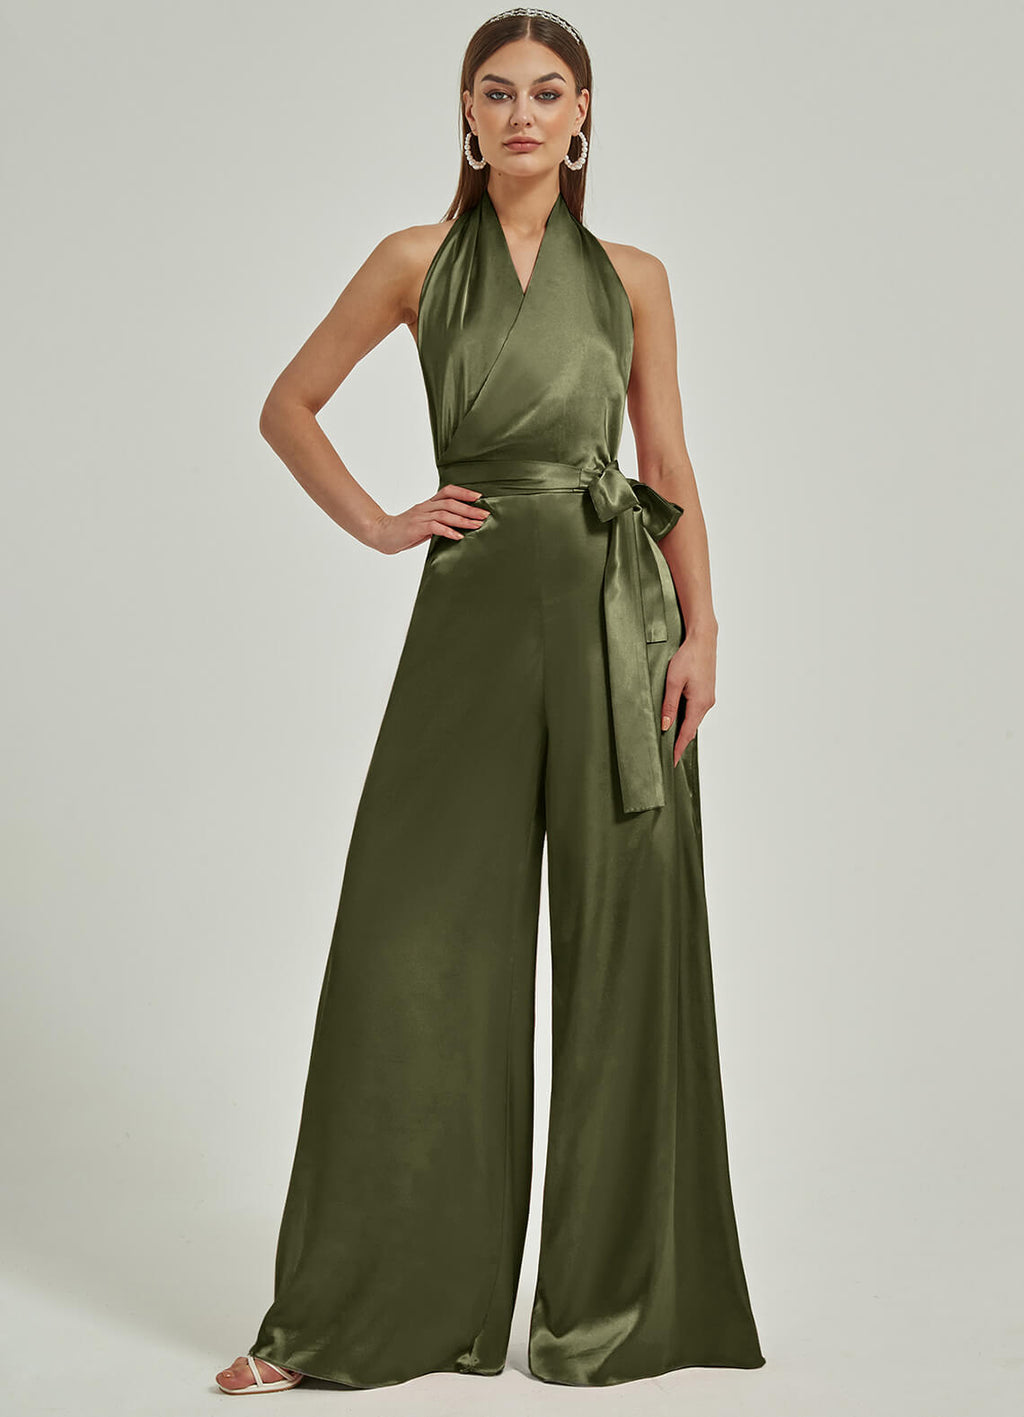  NZBridal Satin Rompers EB30S19 Poppy Olive Green a